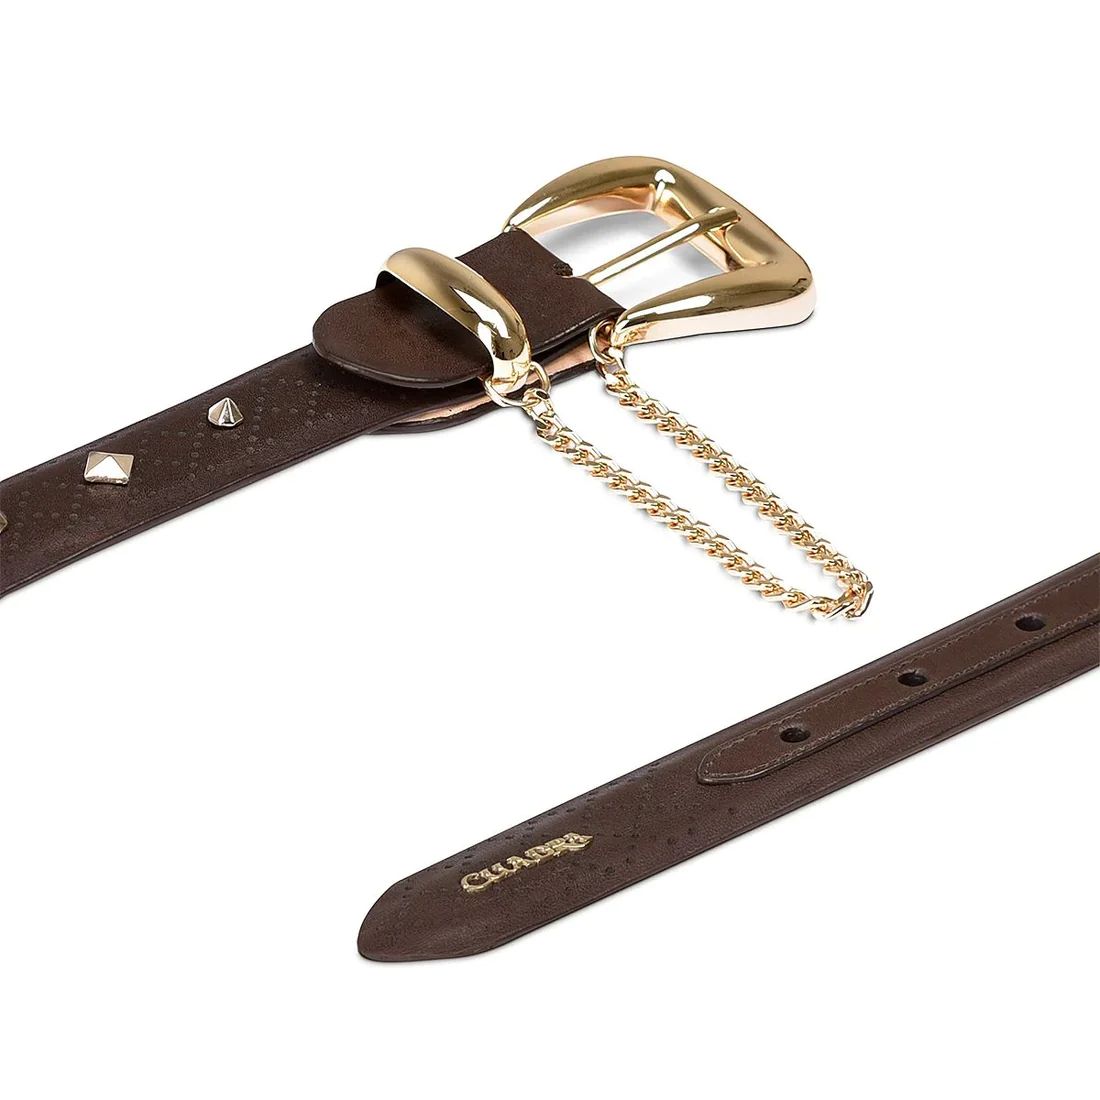 Cuadra | Brown Leather Belt With Decorative Chain